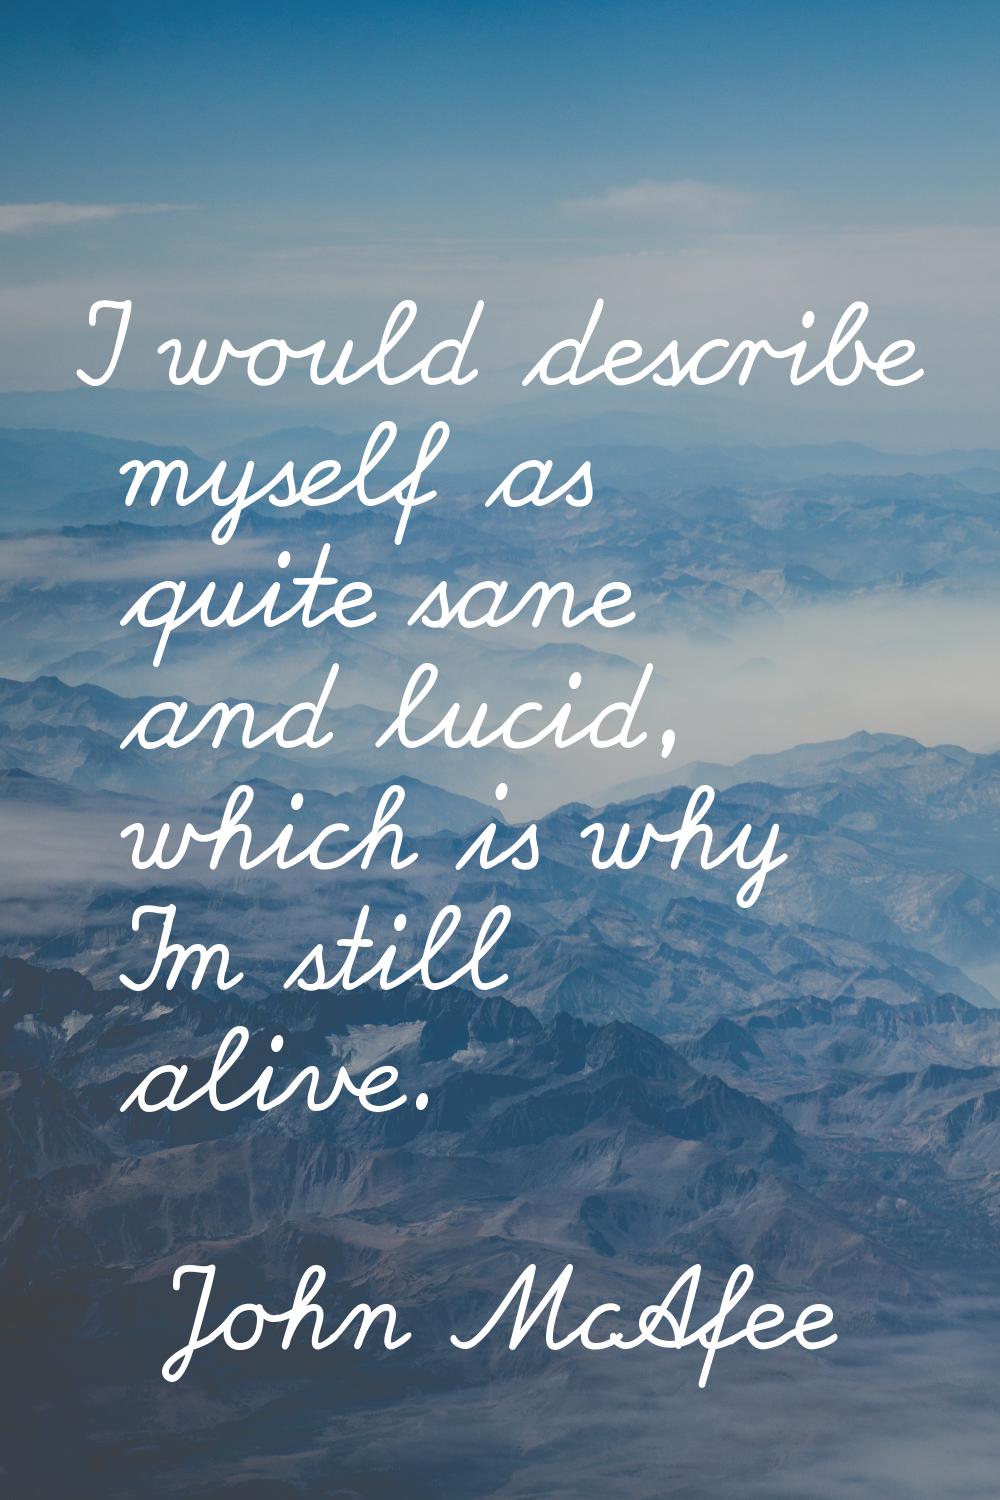 I would describe myself as quite sane and lucid, which is why I'm still alive.